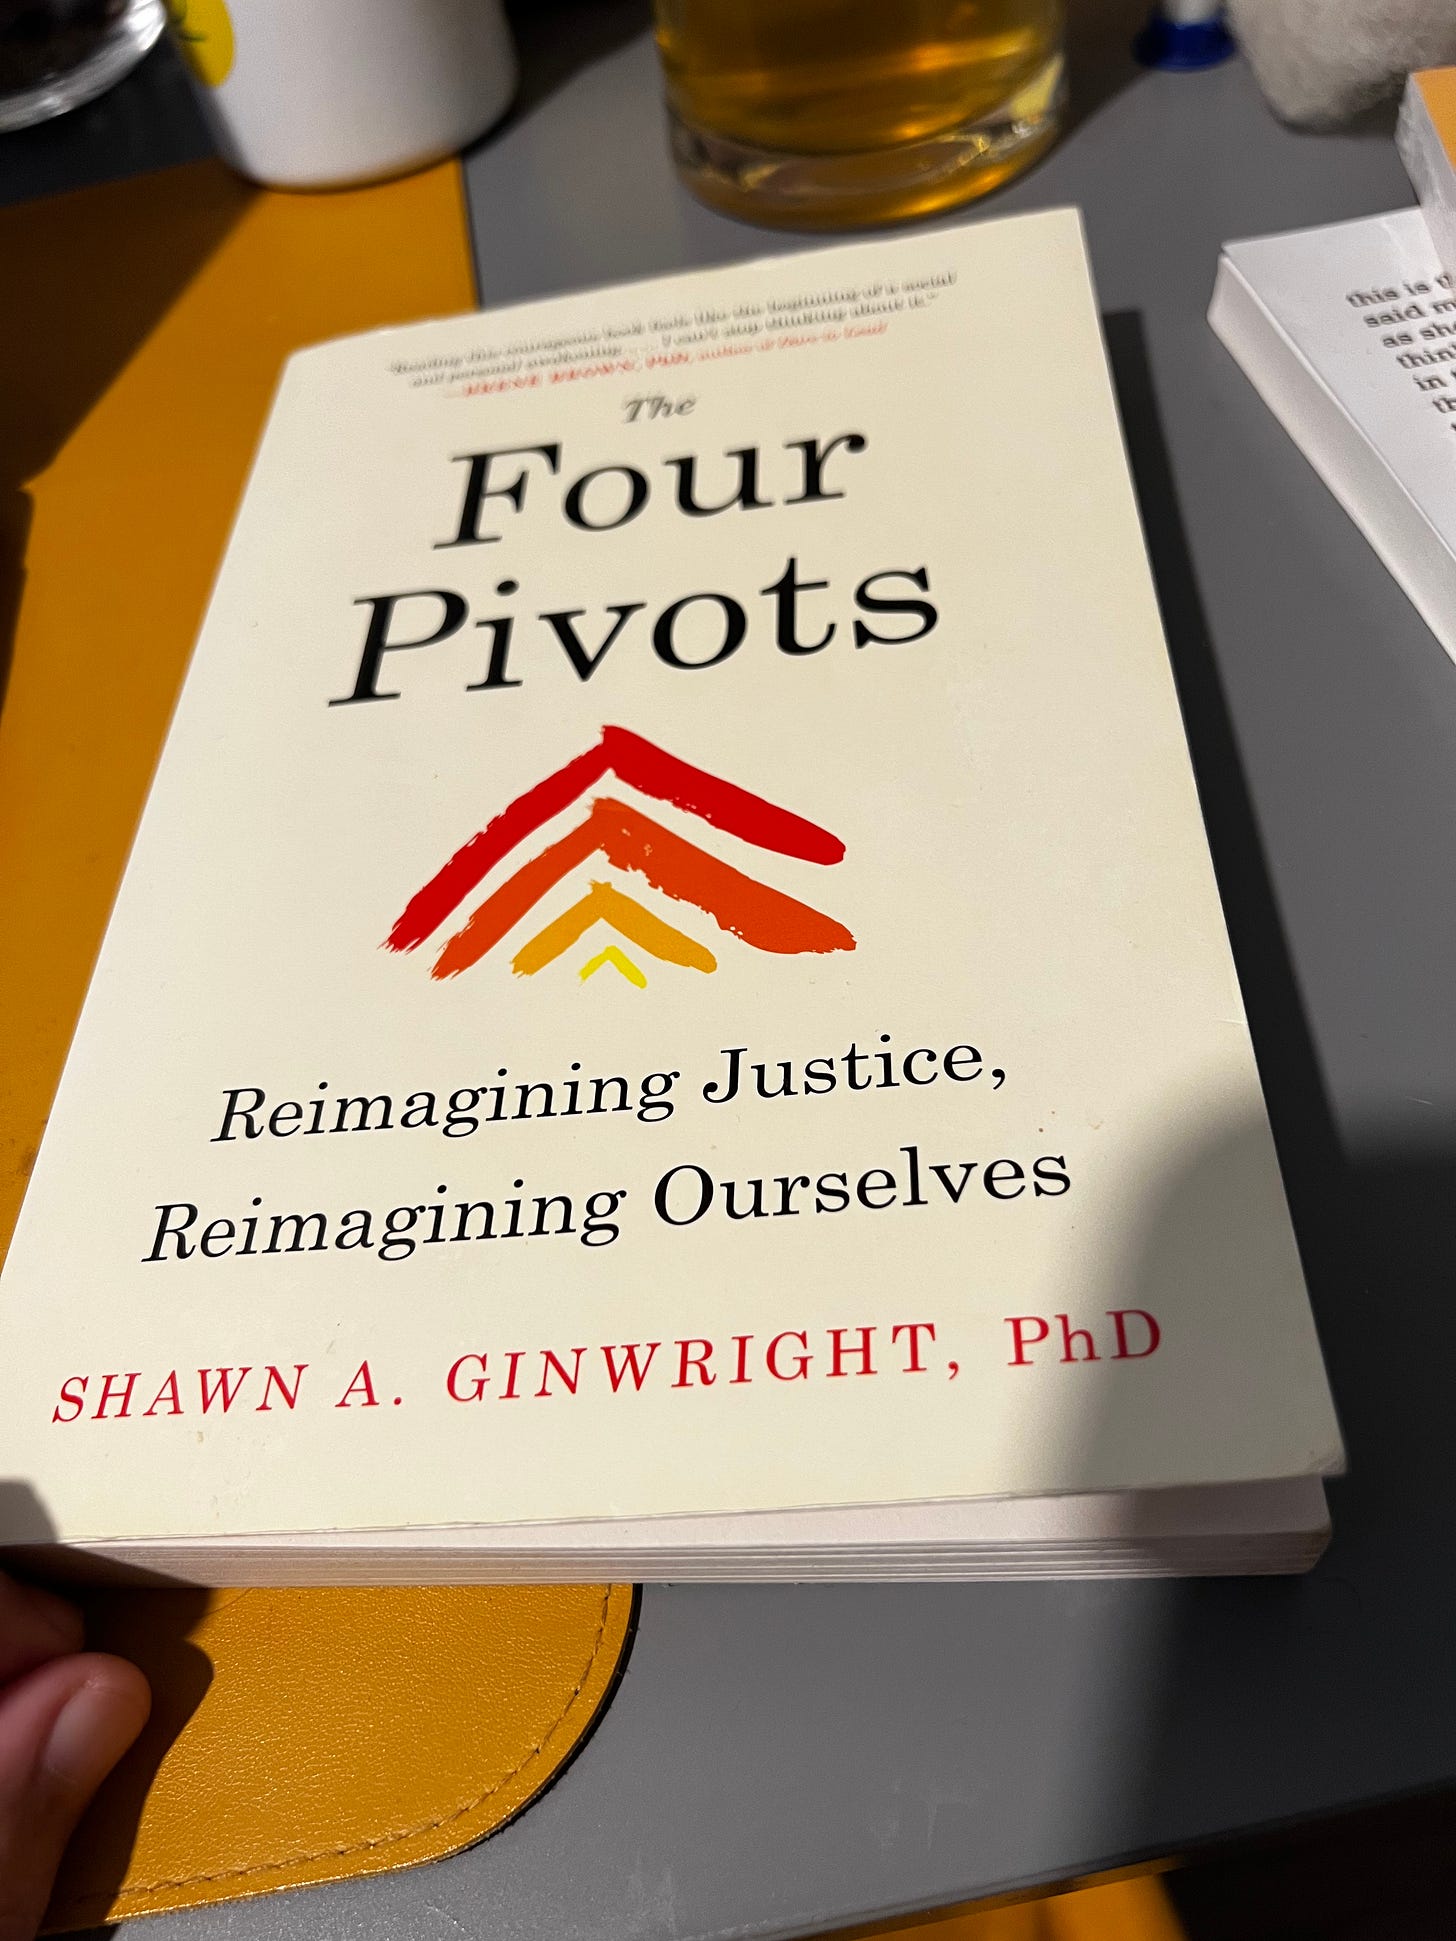 Book The Four Pivots by Shawn Ginwright PhD